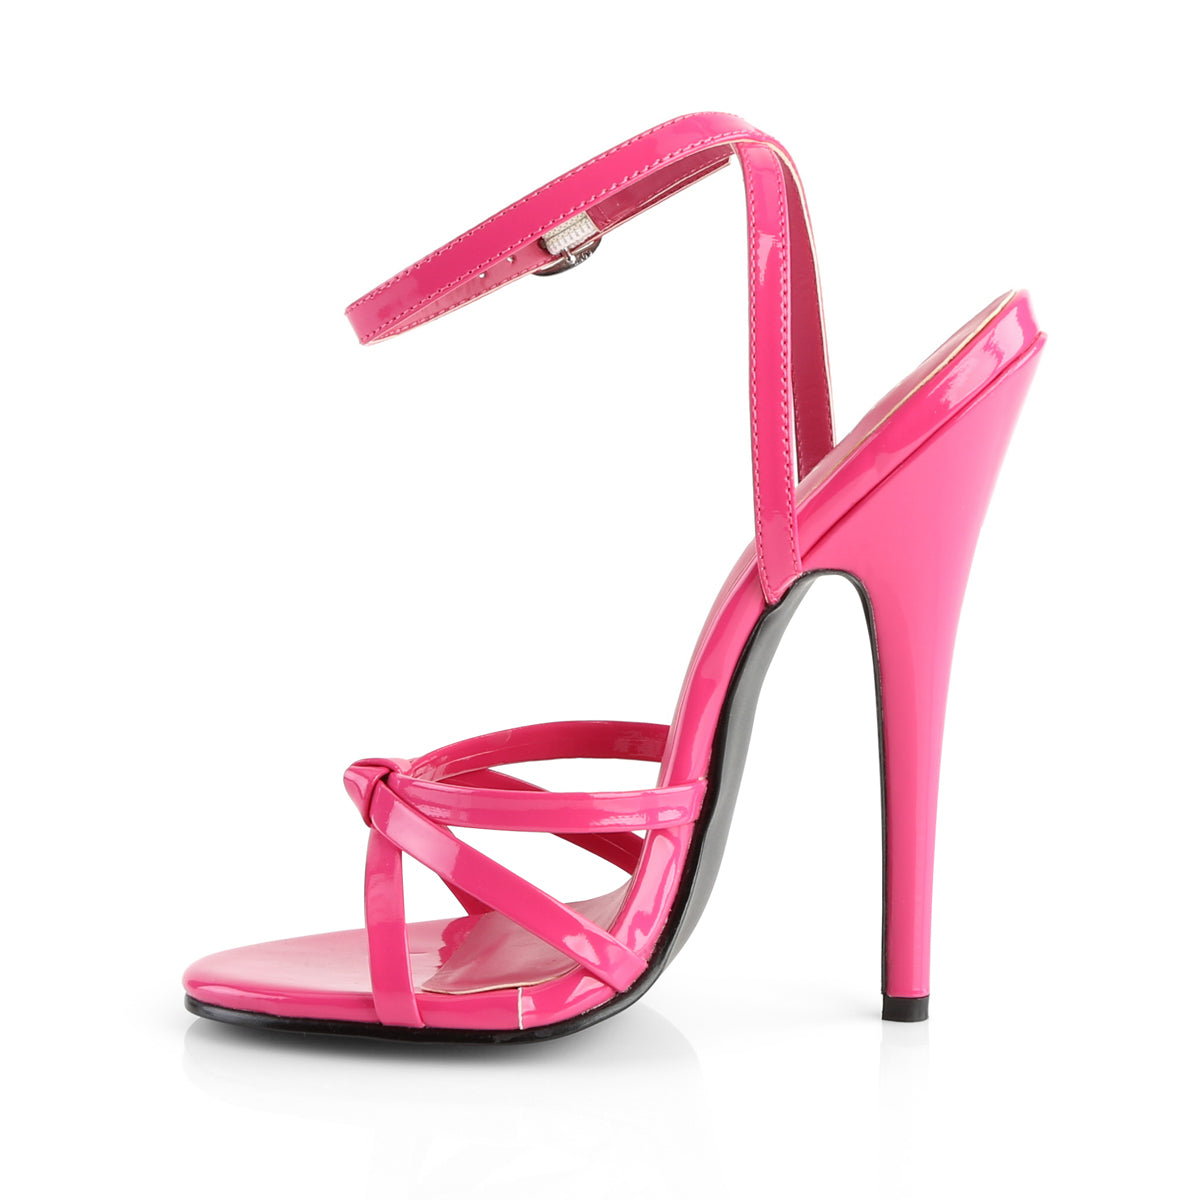 DOMINA-108 Hot Pink Patent Ankle High Heel  Multi view 4